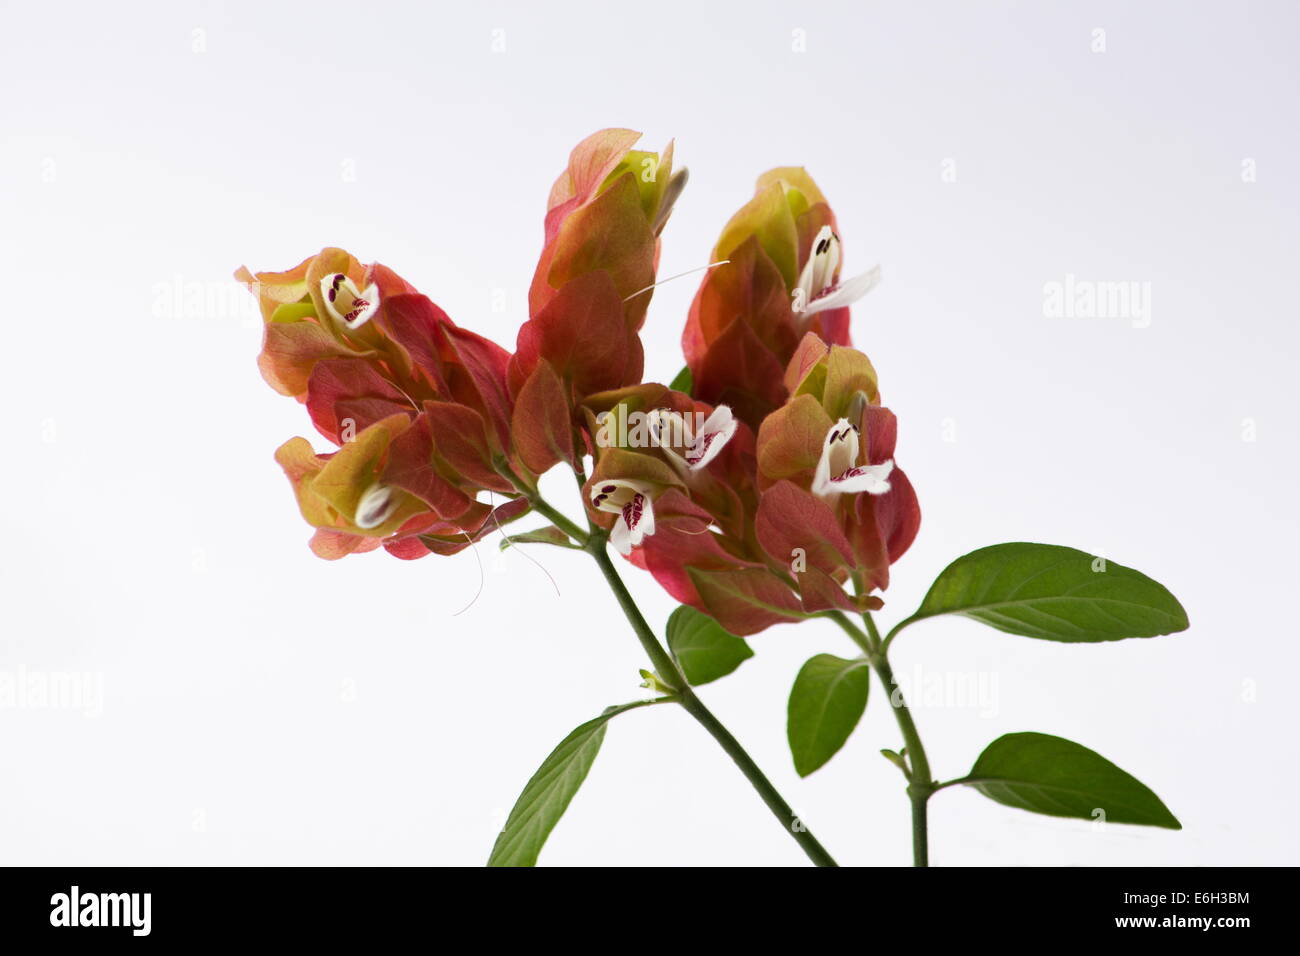 Mexican shrimp plant  (Justicia brandegeeana) flowers on white background Stock Photo